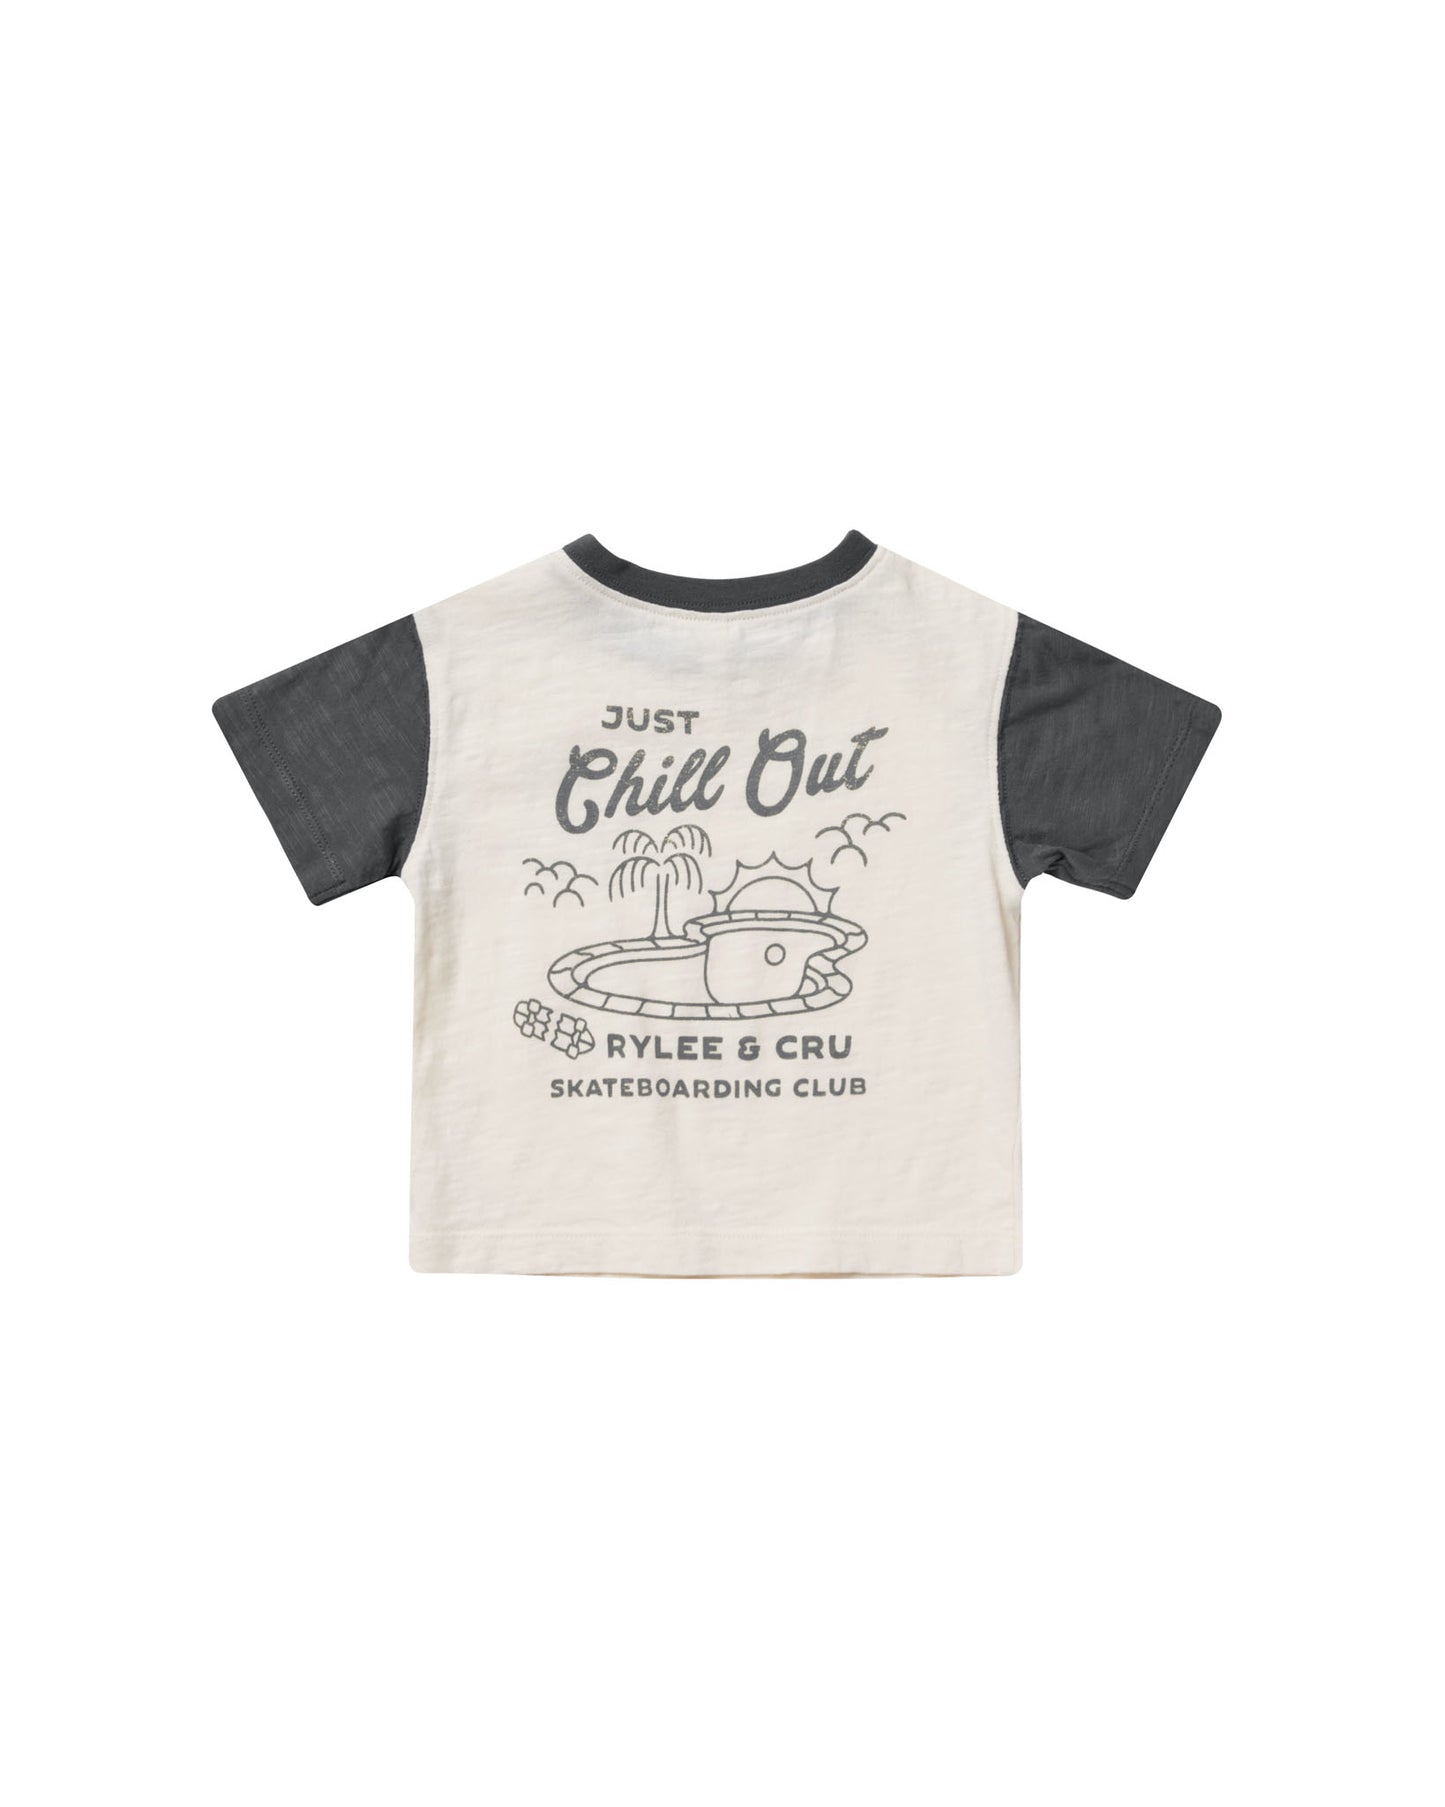 Rylee + Cru - Contrast Short Sleeve Tee - Chill Out